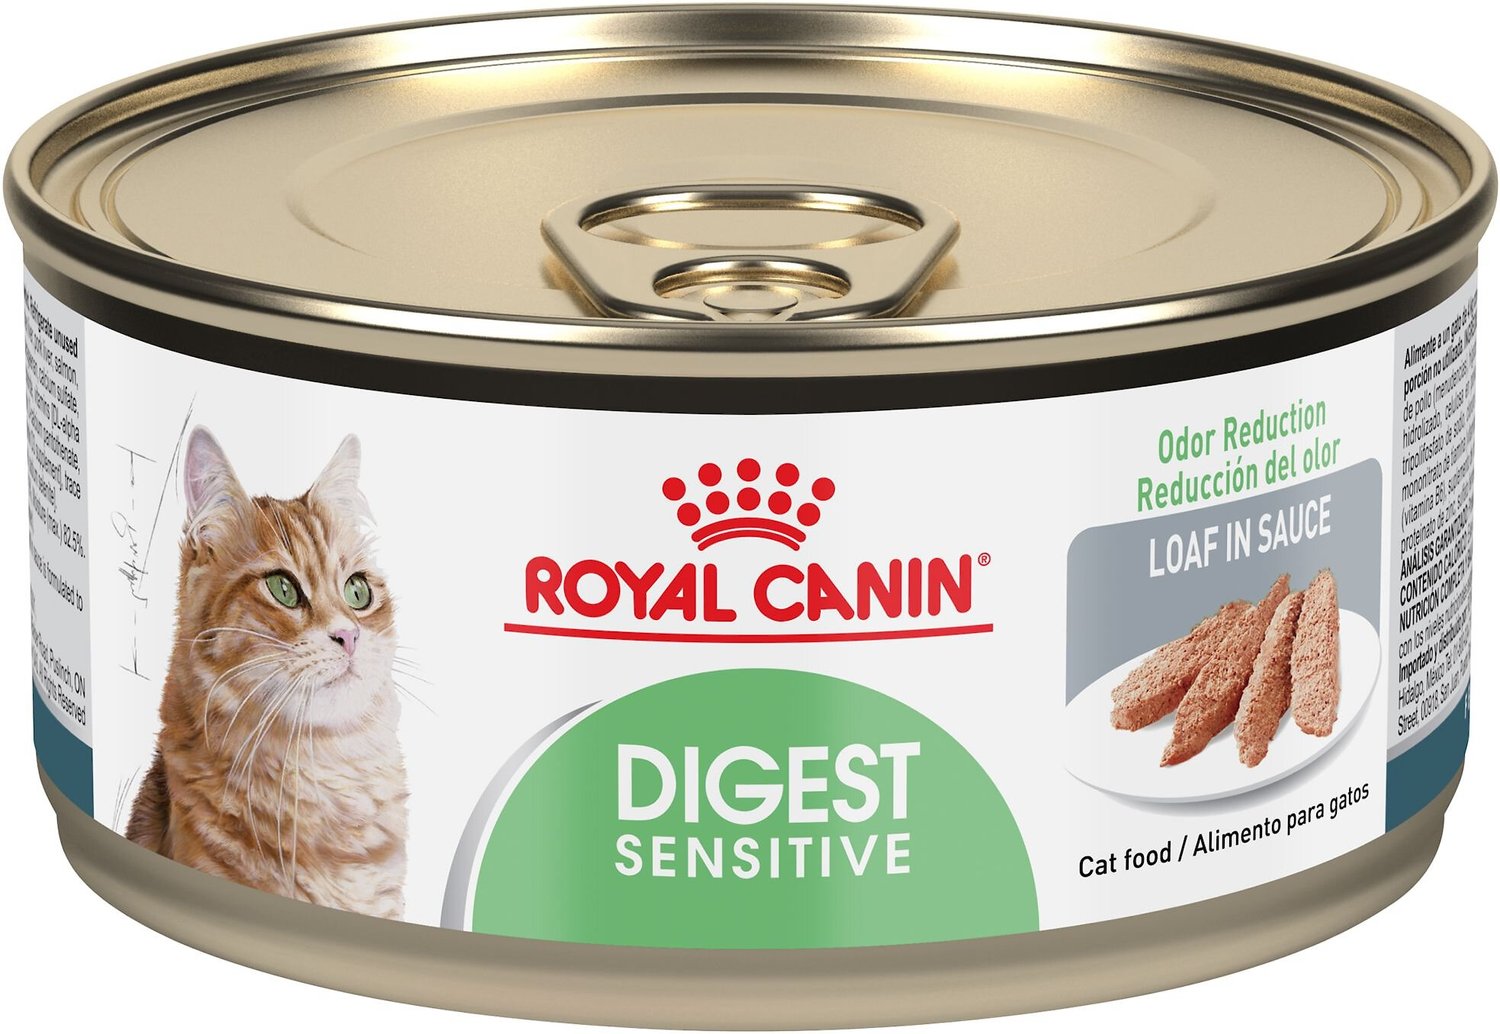 Royal Canin Digest Sensitive Loaf in Sauce Canned Cat Food, 5.8oz